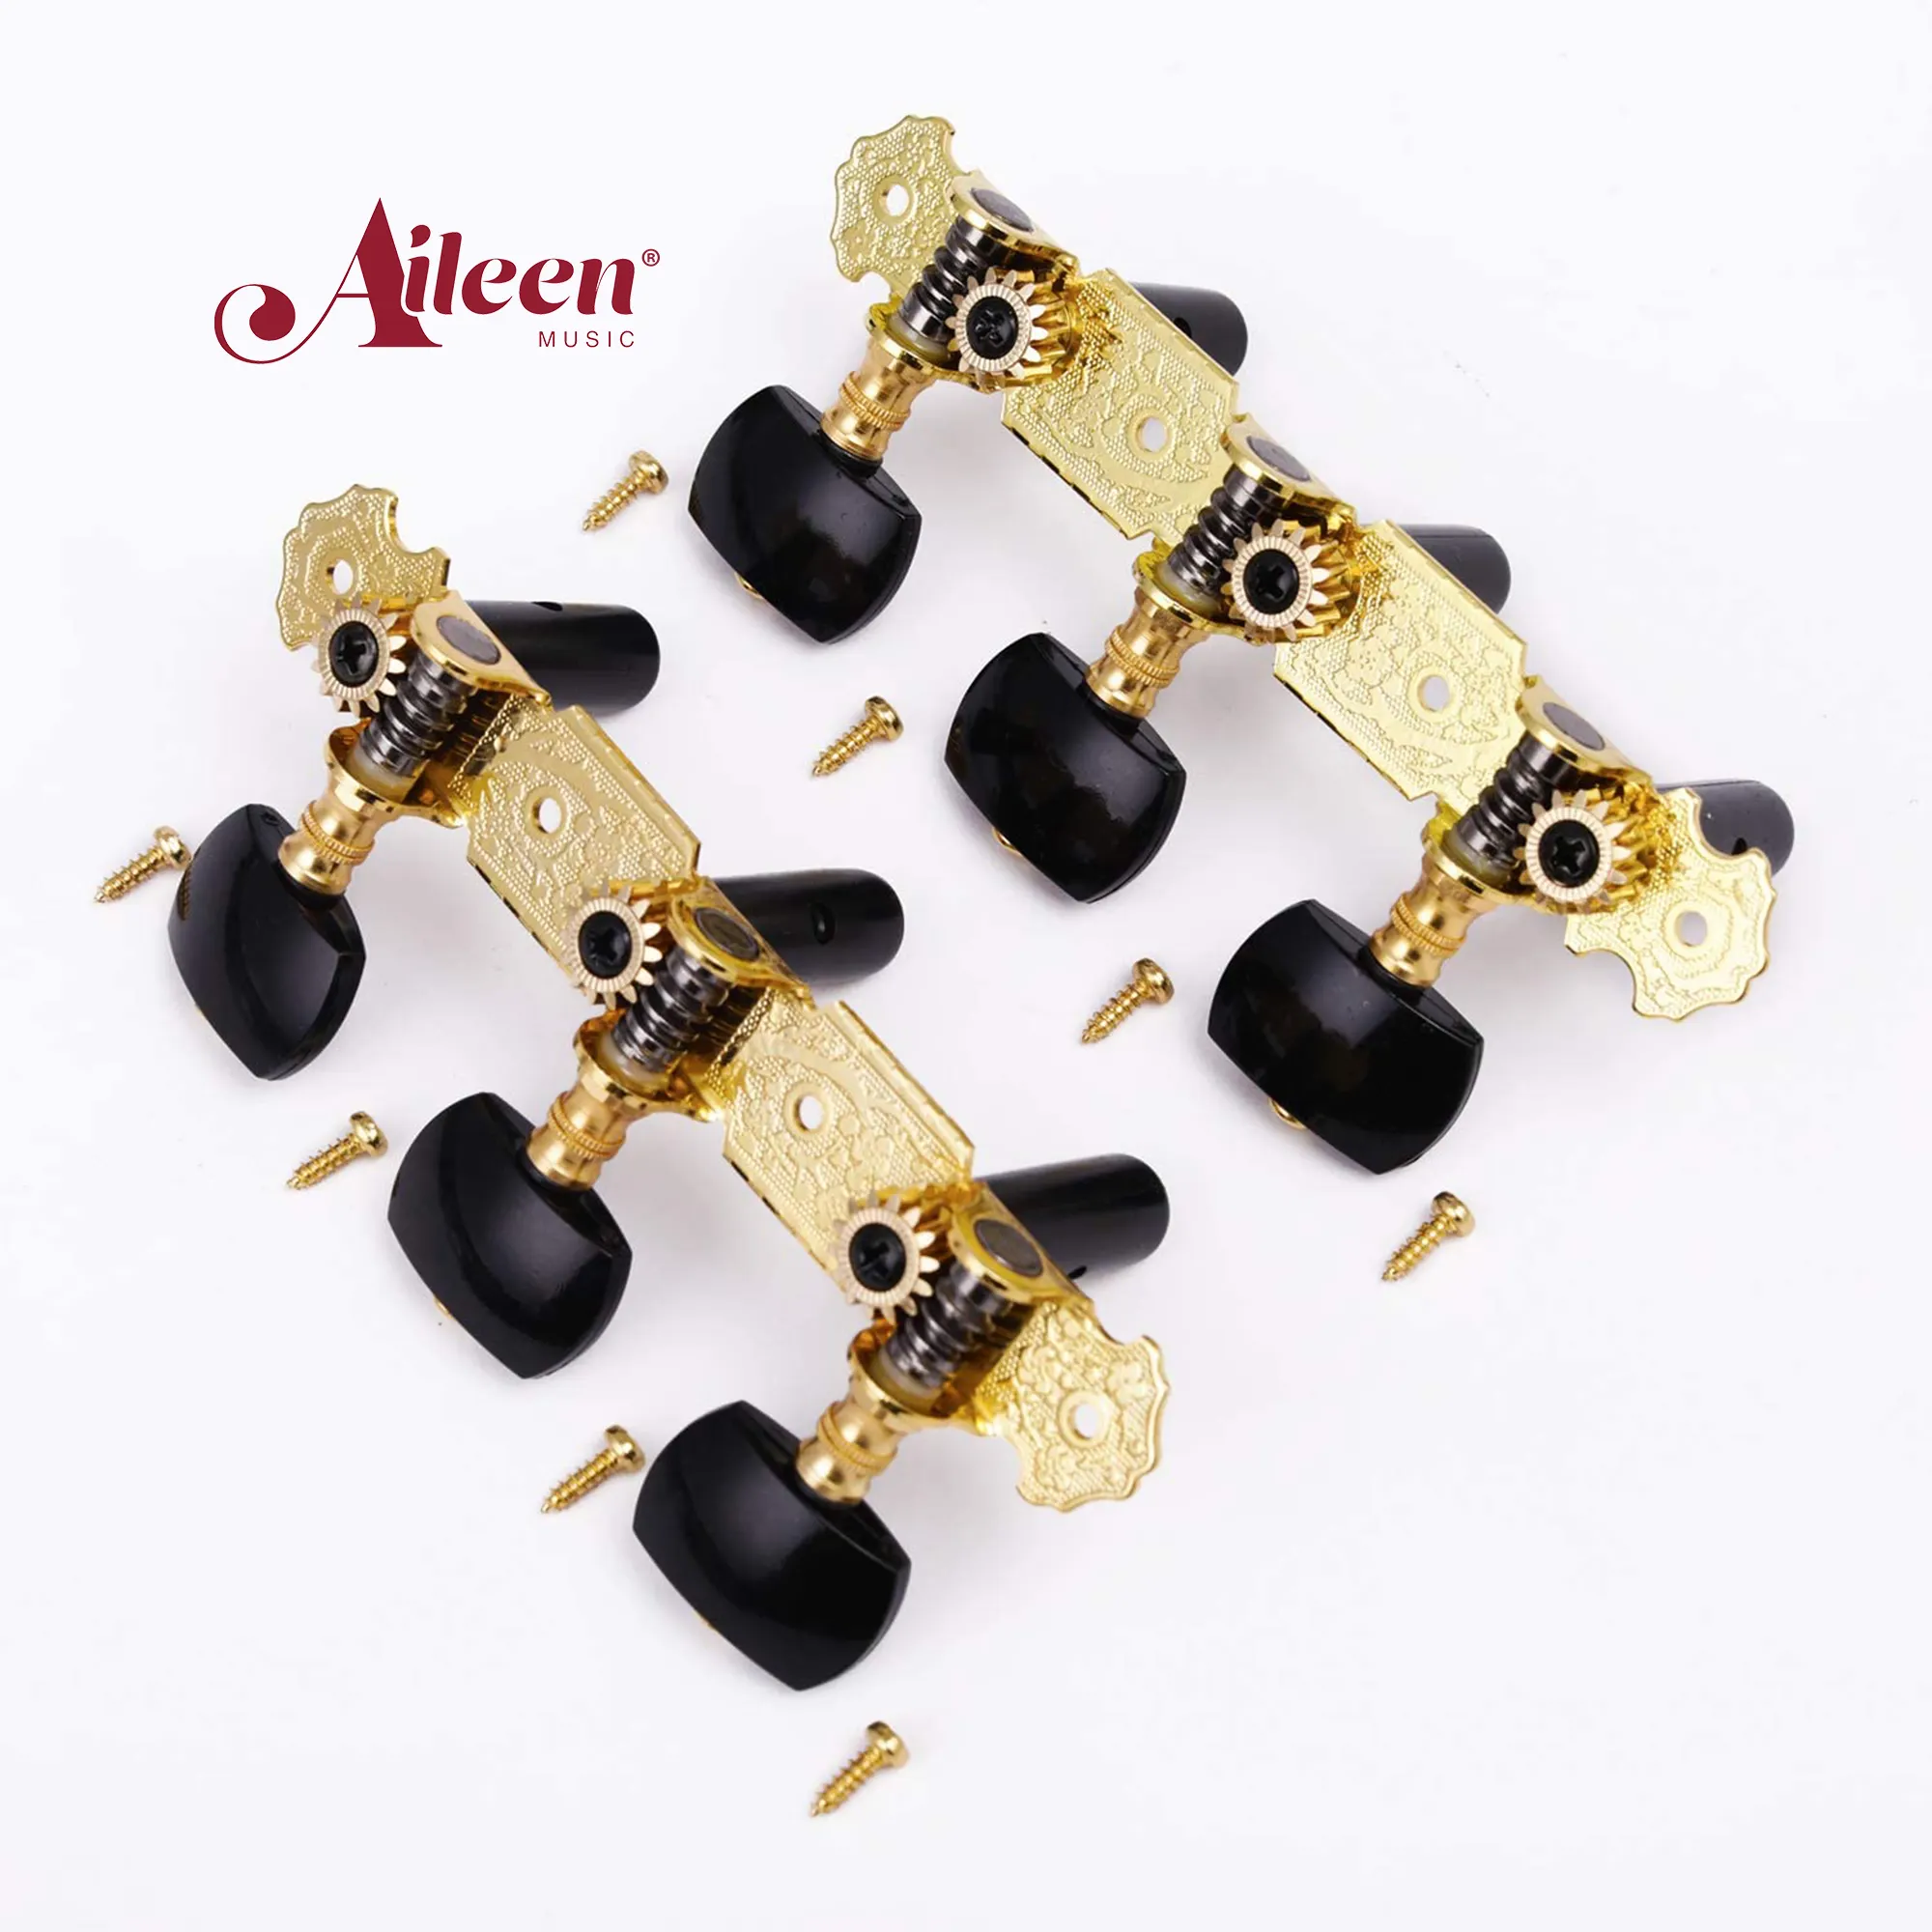 Wholesale Classical guitar tuning machine gold plated 3+3 Guitar Tuning Pegs(MH-04C)